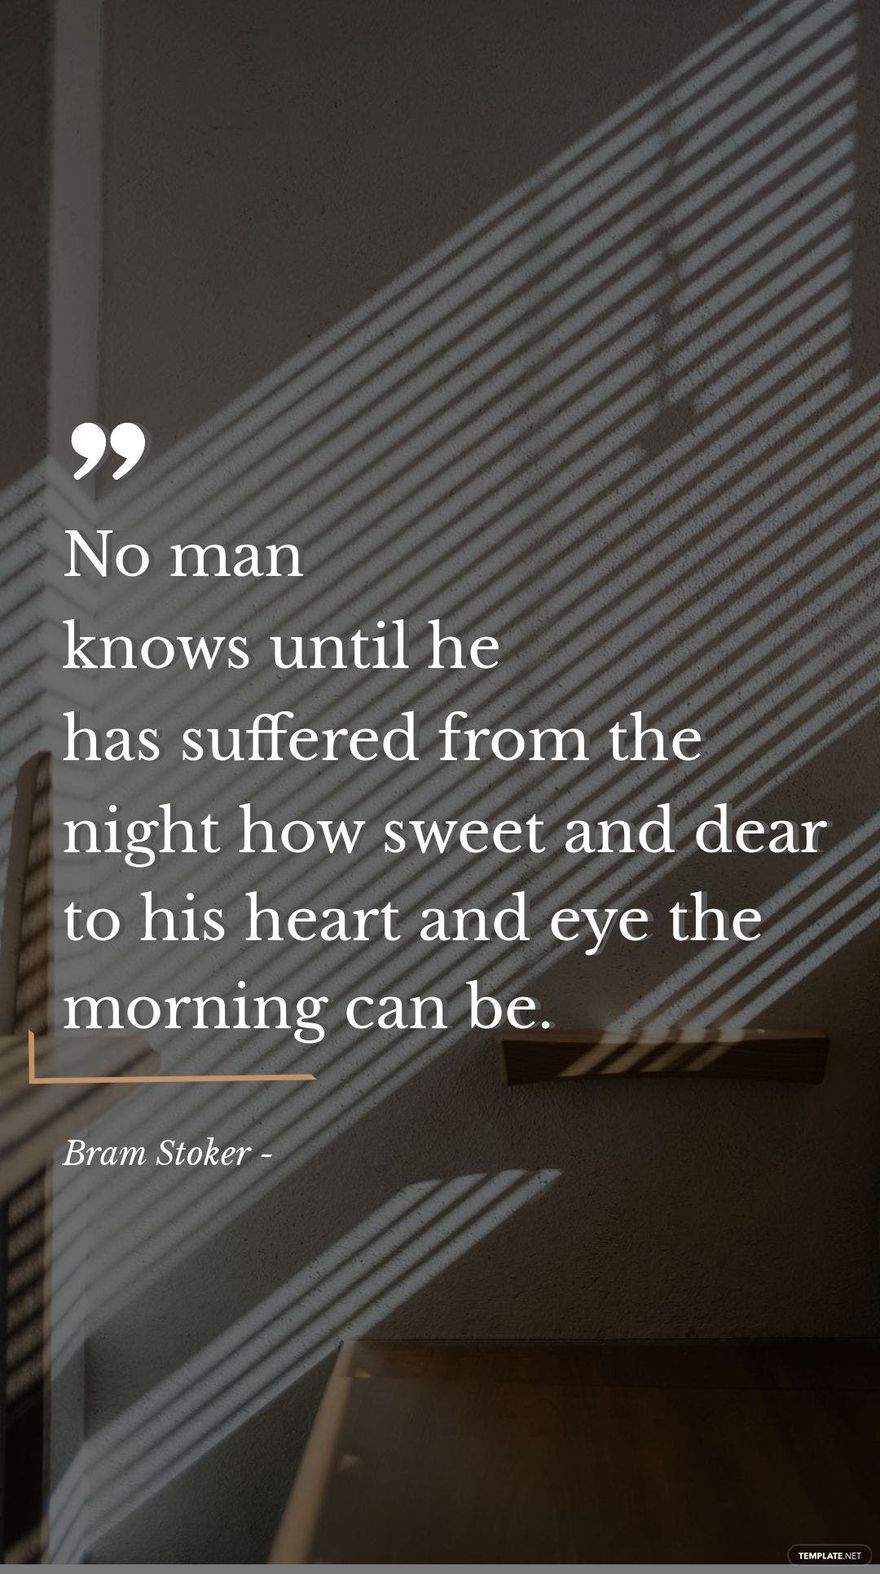 Bram Stoker - No man knows until he has suffered from the night how sweet and dear to his heart and eye the morning can be.